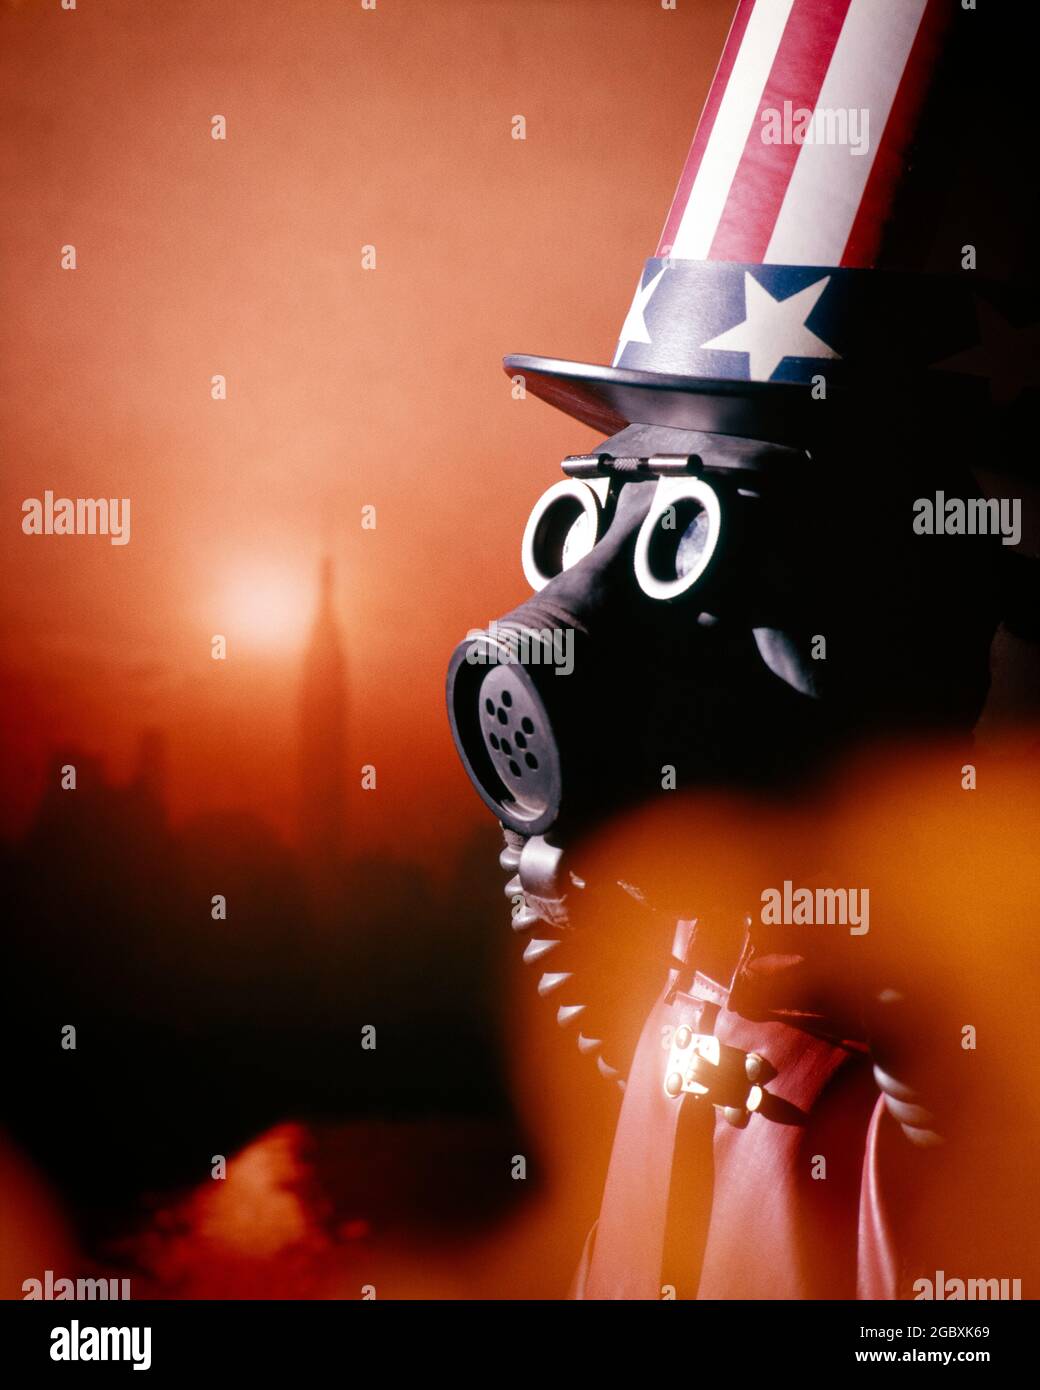 1970s UNCLE SAM WEARING GAS MASK SUNSET SMOGGY NEW YORK CITY IN BACKGROUND  - ks6982 HAR001 HARS COMPOSITE WARNING GOTHAM NYC POLITICS CONCEPT CONCEPTUAL NEW YORK CITIES ECOLOGY NEW YORK CITY SYMBOLIC CONCEPTS POLLUTE SOLUTIONS BAD AIR BIG APPLE CLIMATE HAR001 OLD FASHIONED REPRESENTATION TOXIC UNCLE SAM Stock Photo